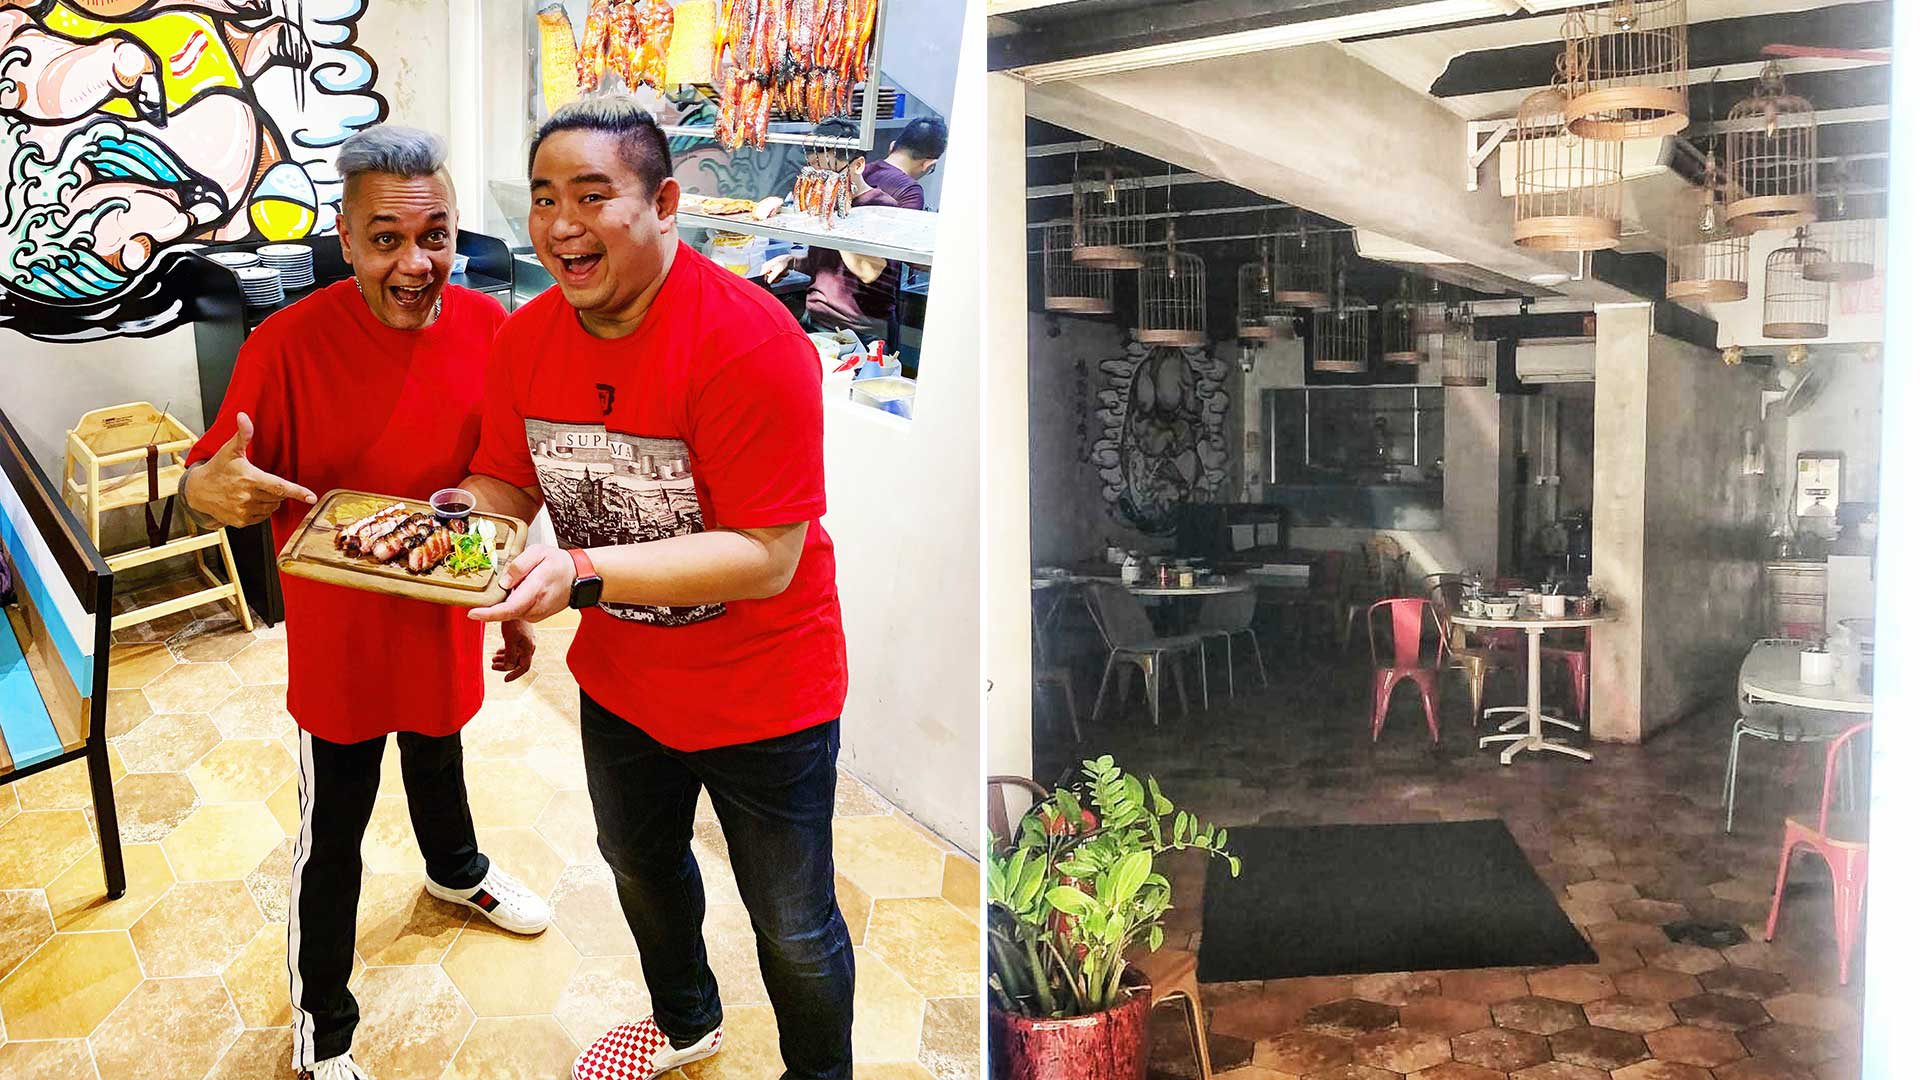 Class 95 DJs The Muttons’ Restaurant Fook Kin Caught Fire, 40 Diners Safely Evacuated